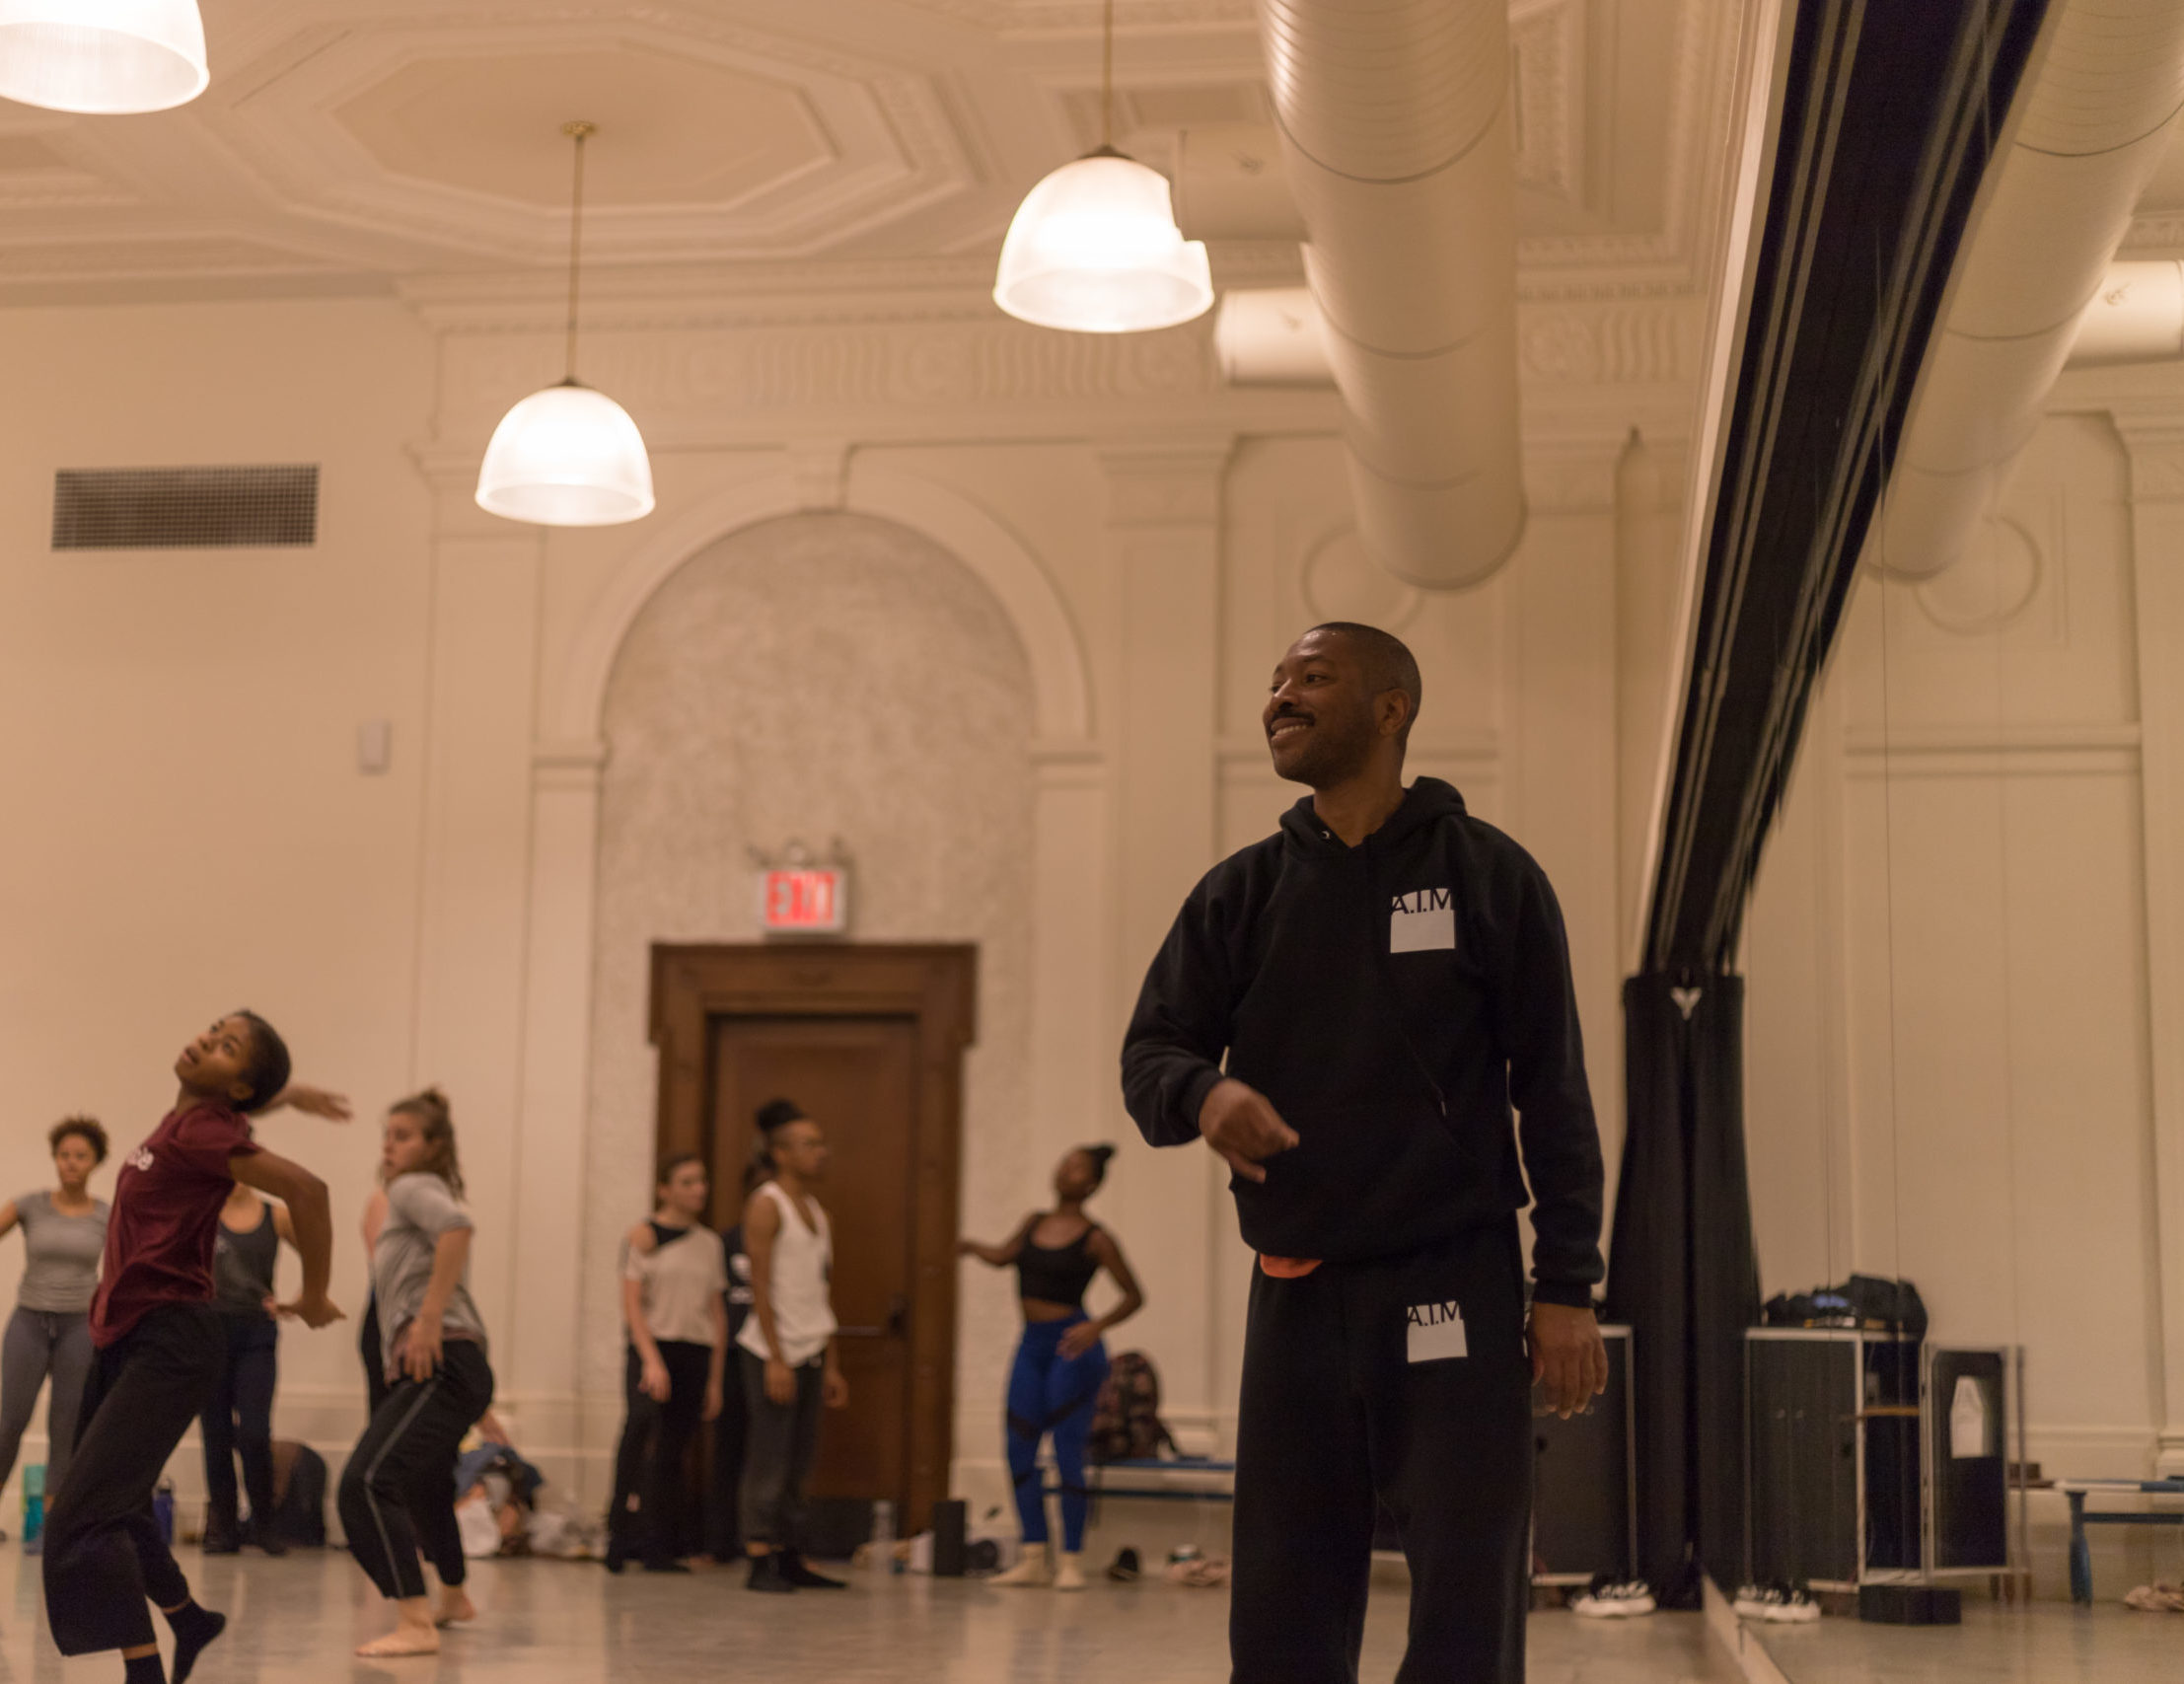 Kyle Abraham, wearing a hoodie with the A.I.M logo over the chest, smiles as he watches a group of dancers from the front of a large studio. One hand rises past his sternum as he goes to make a gesture.